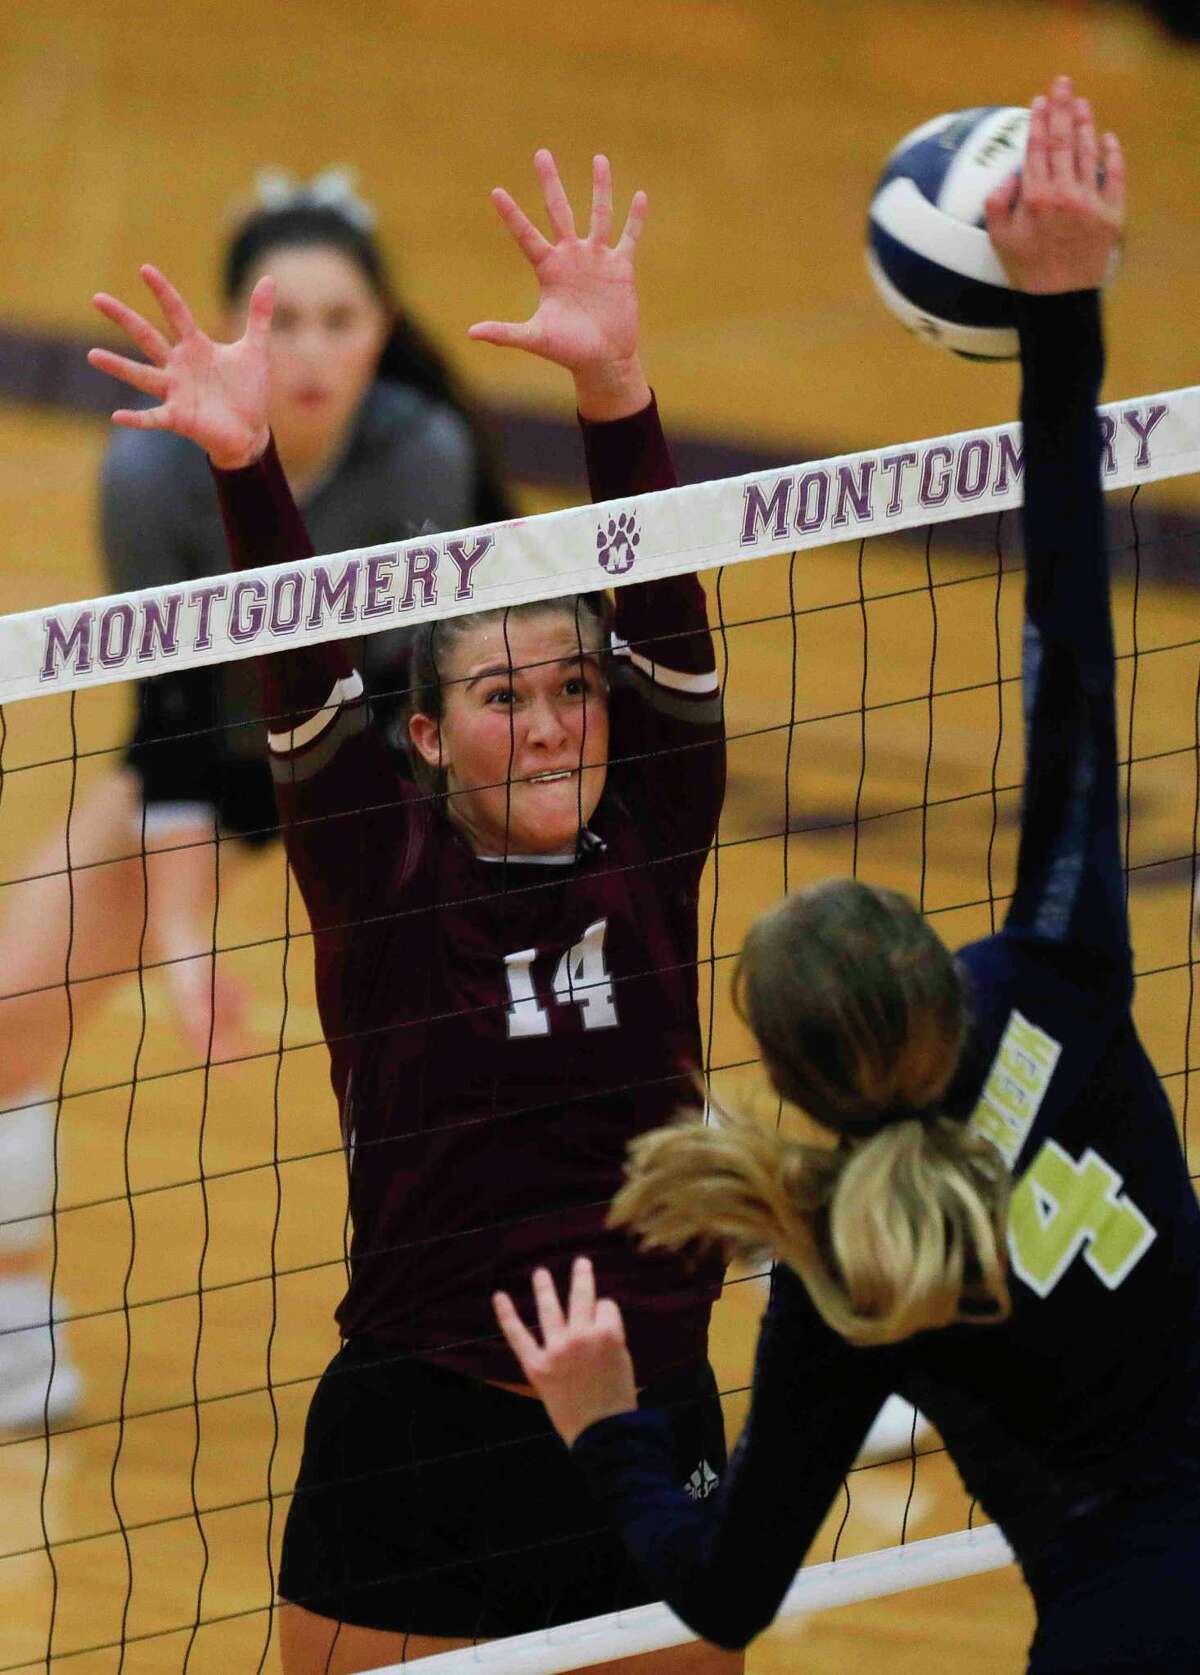 Magnolia middle blocker Alex Bull (14) blocks a shot by Lake Creek outside hitter Payton Woods (4) in the third set of a Region III-5A bi-district volleyball playoff match at Montgomery High School, Tuesday, Nov. 2, 2021, in Montgomery.